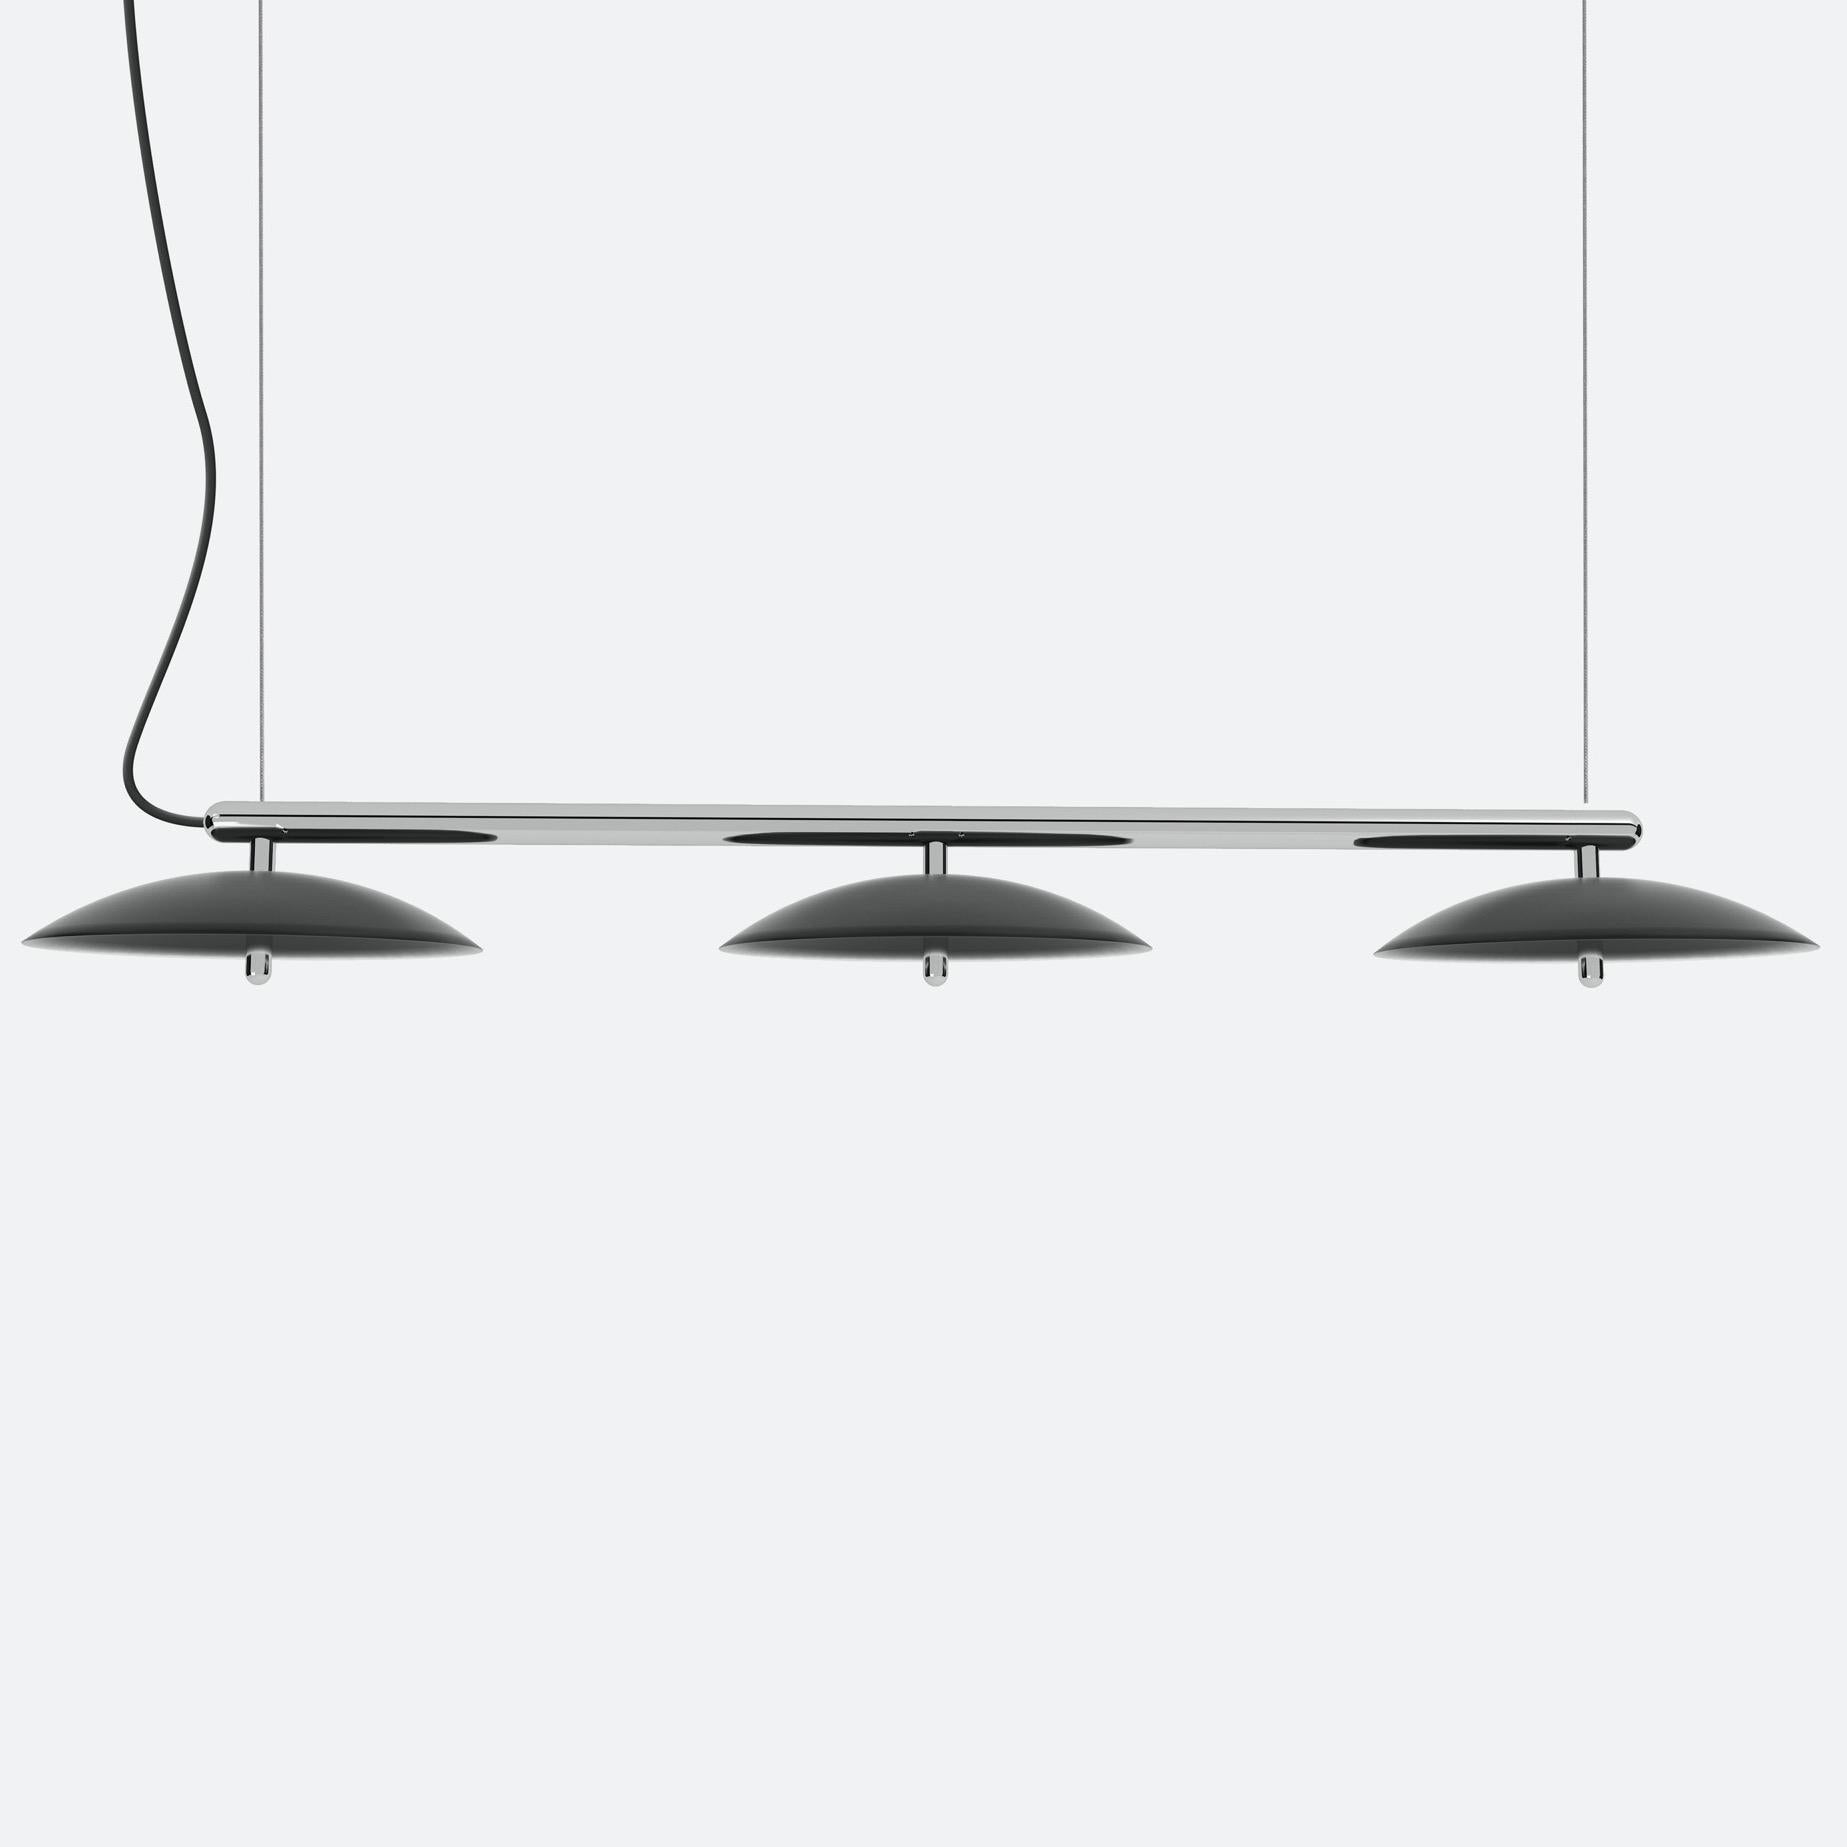 Price is for a signal linear pendant with white shade and nickel accents. This piece is customizable so we can also make the finishes per order to your spec. 

Lamping: G8 LED Bulbs (included)
Canopy: Black, 5in Diameter, .25in height
6x G8 LED